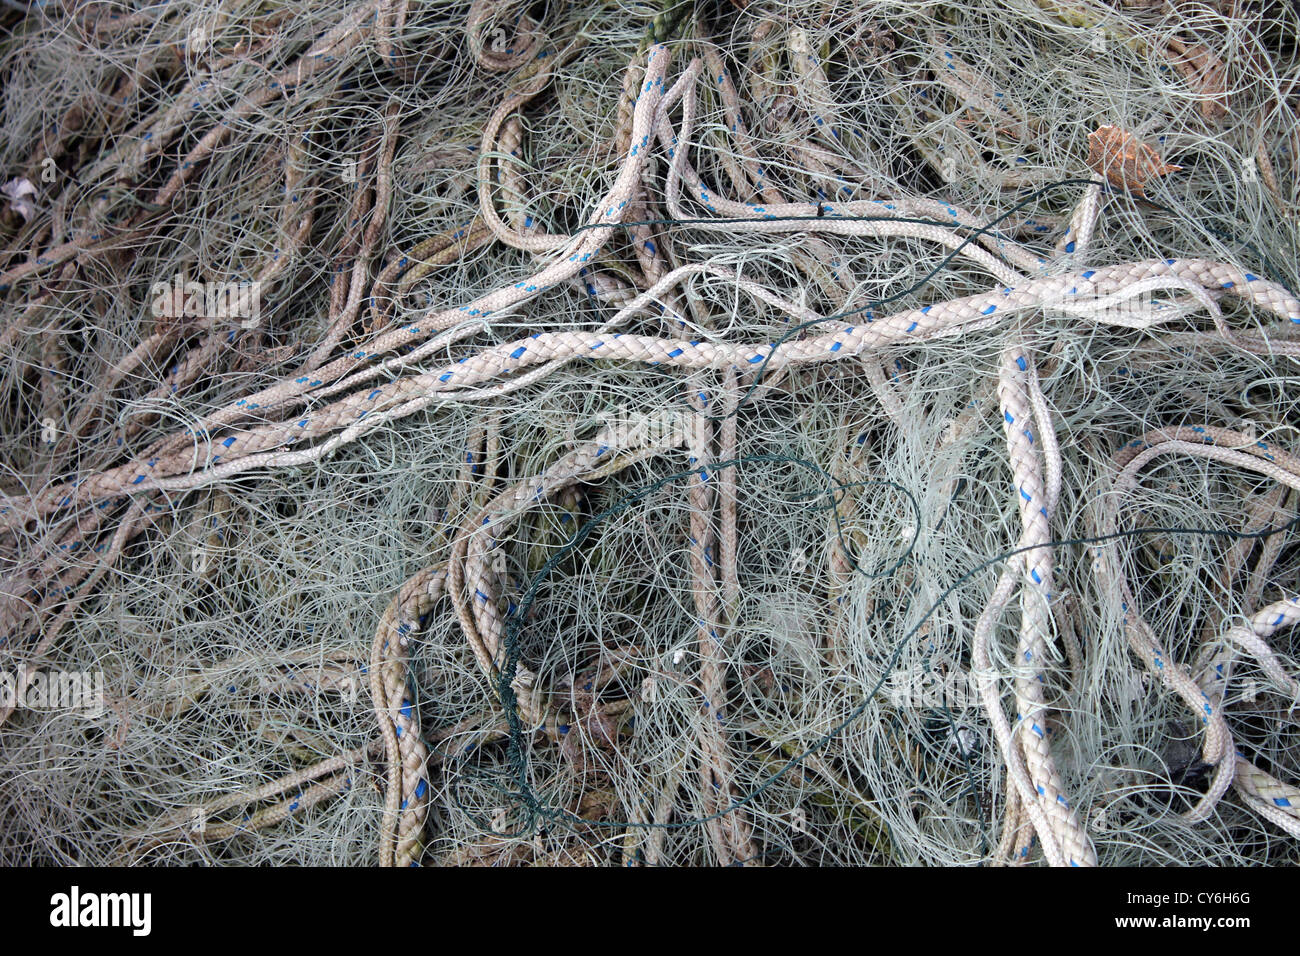 Background of fishing twine, lines and ropes. Stock Photo